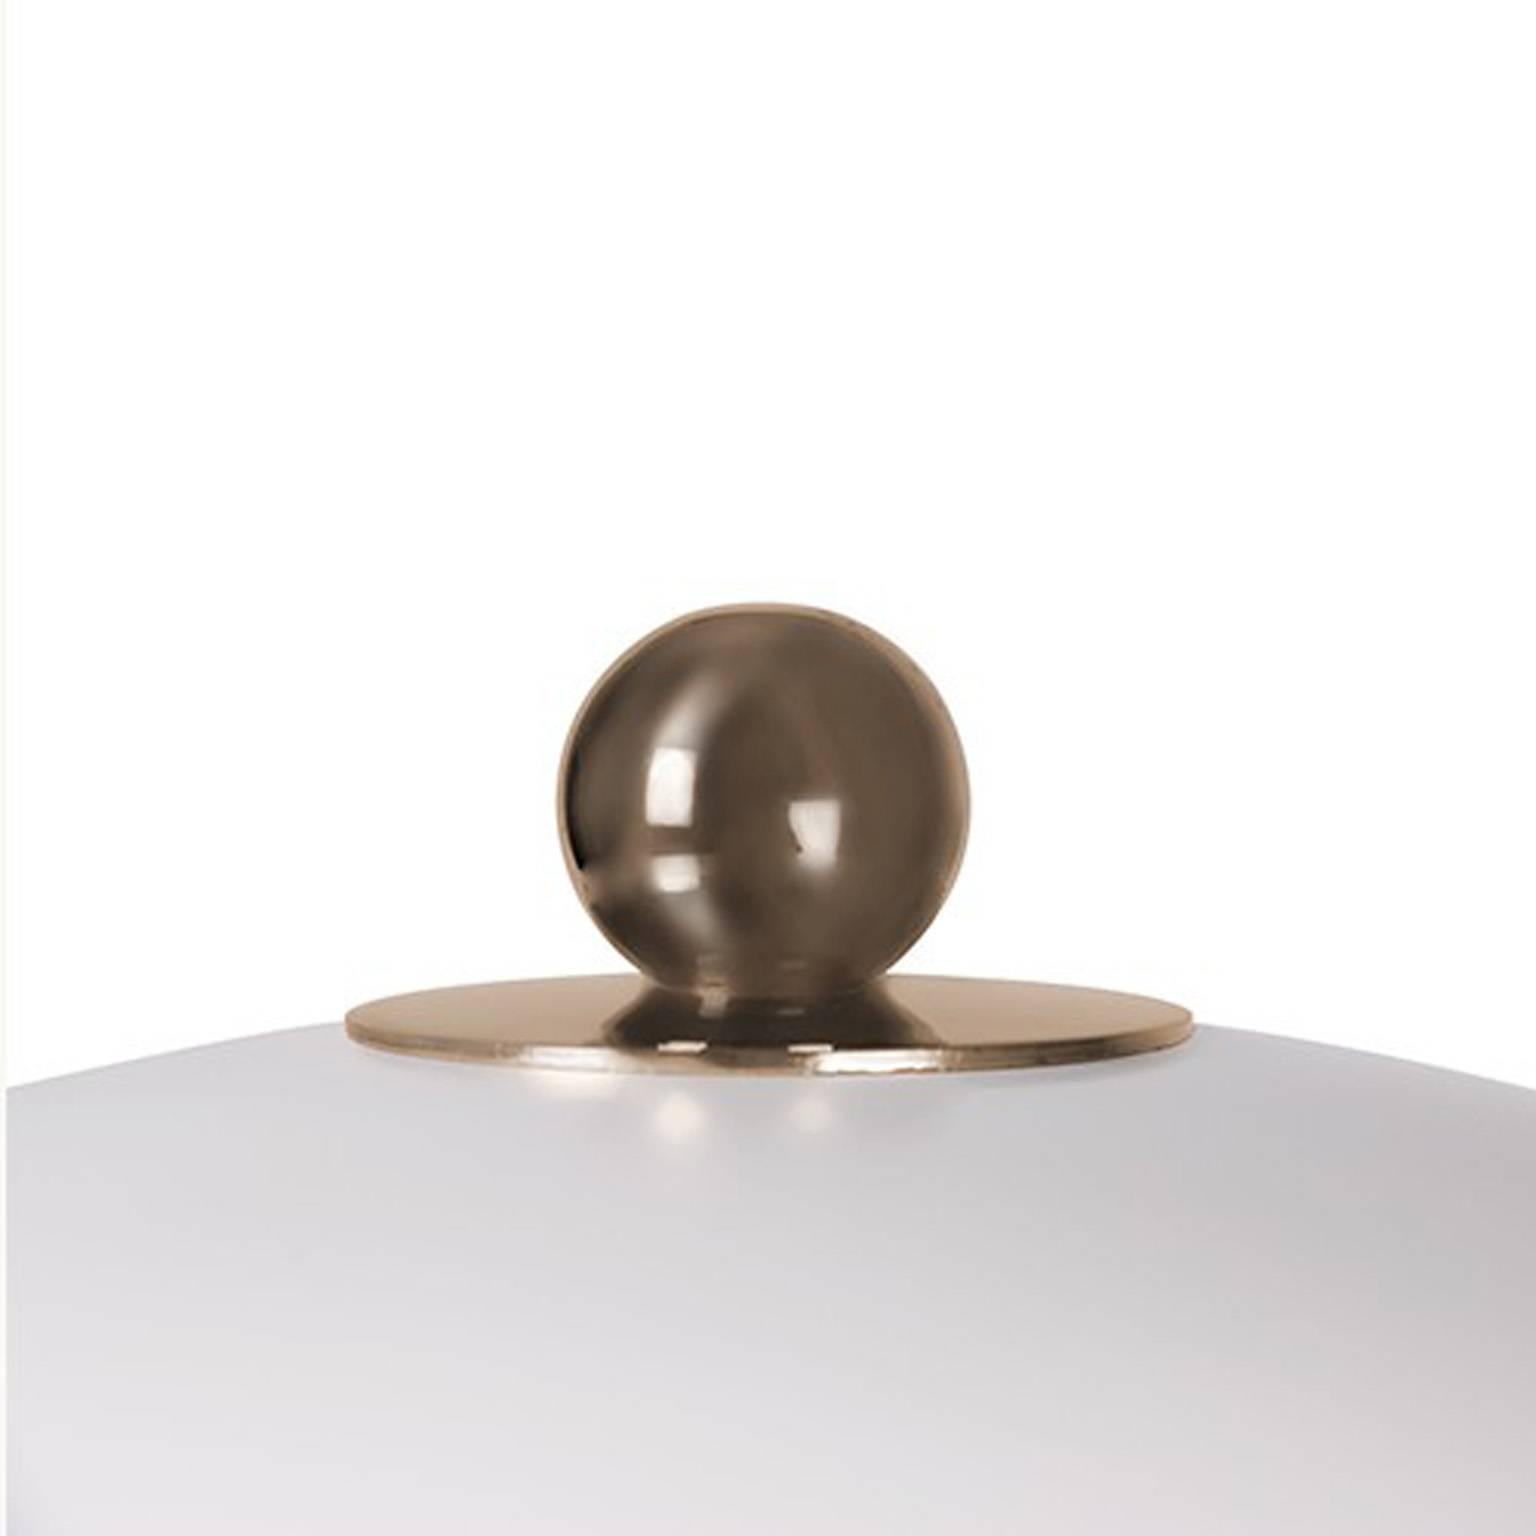 Turner table is simply a head turner. The arcs are made in brass with a copper finish and the top cover in aluminium lacquered in glossy white.